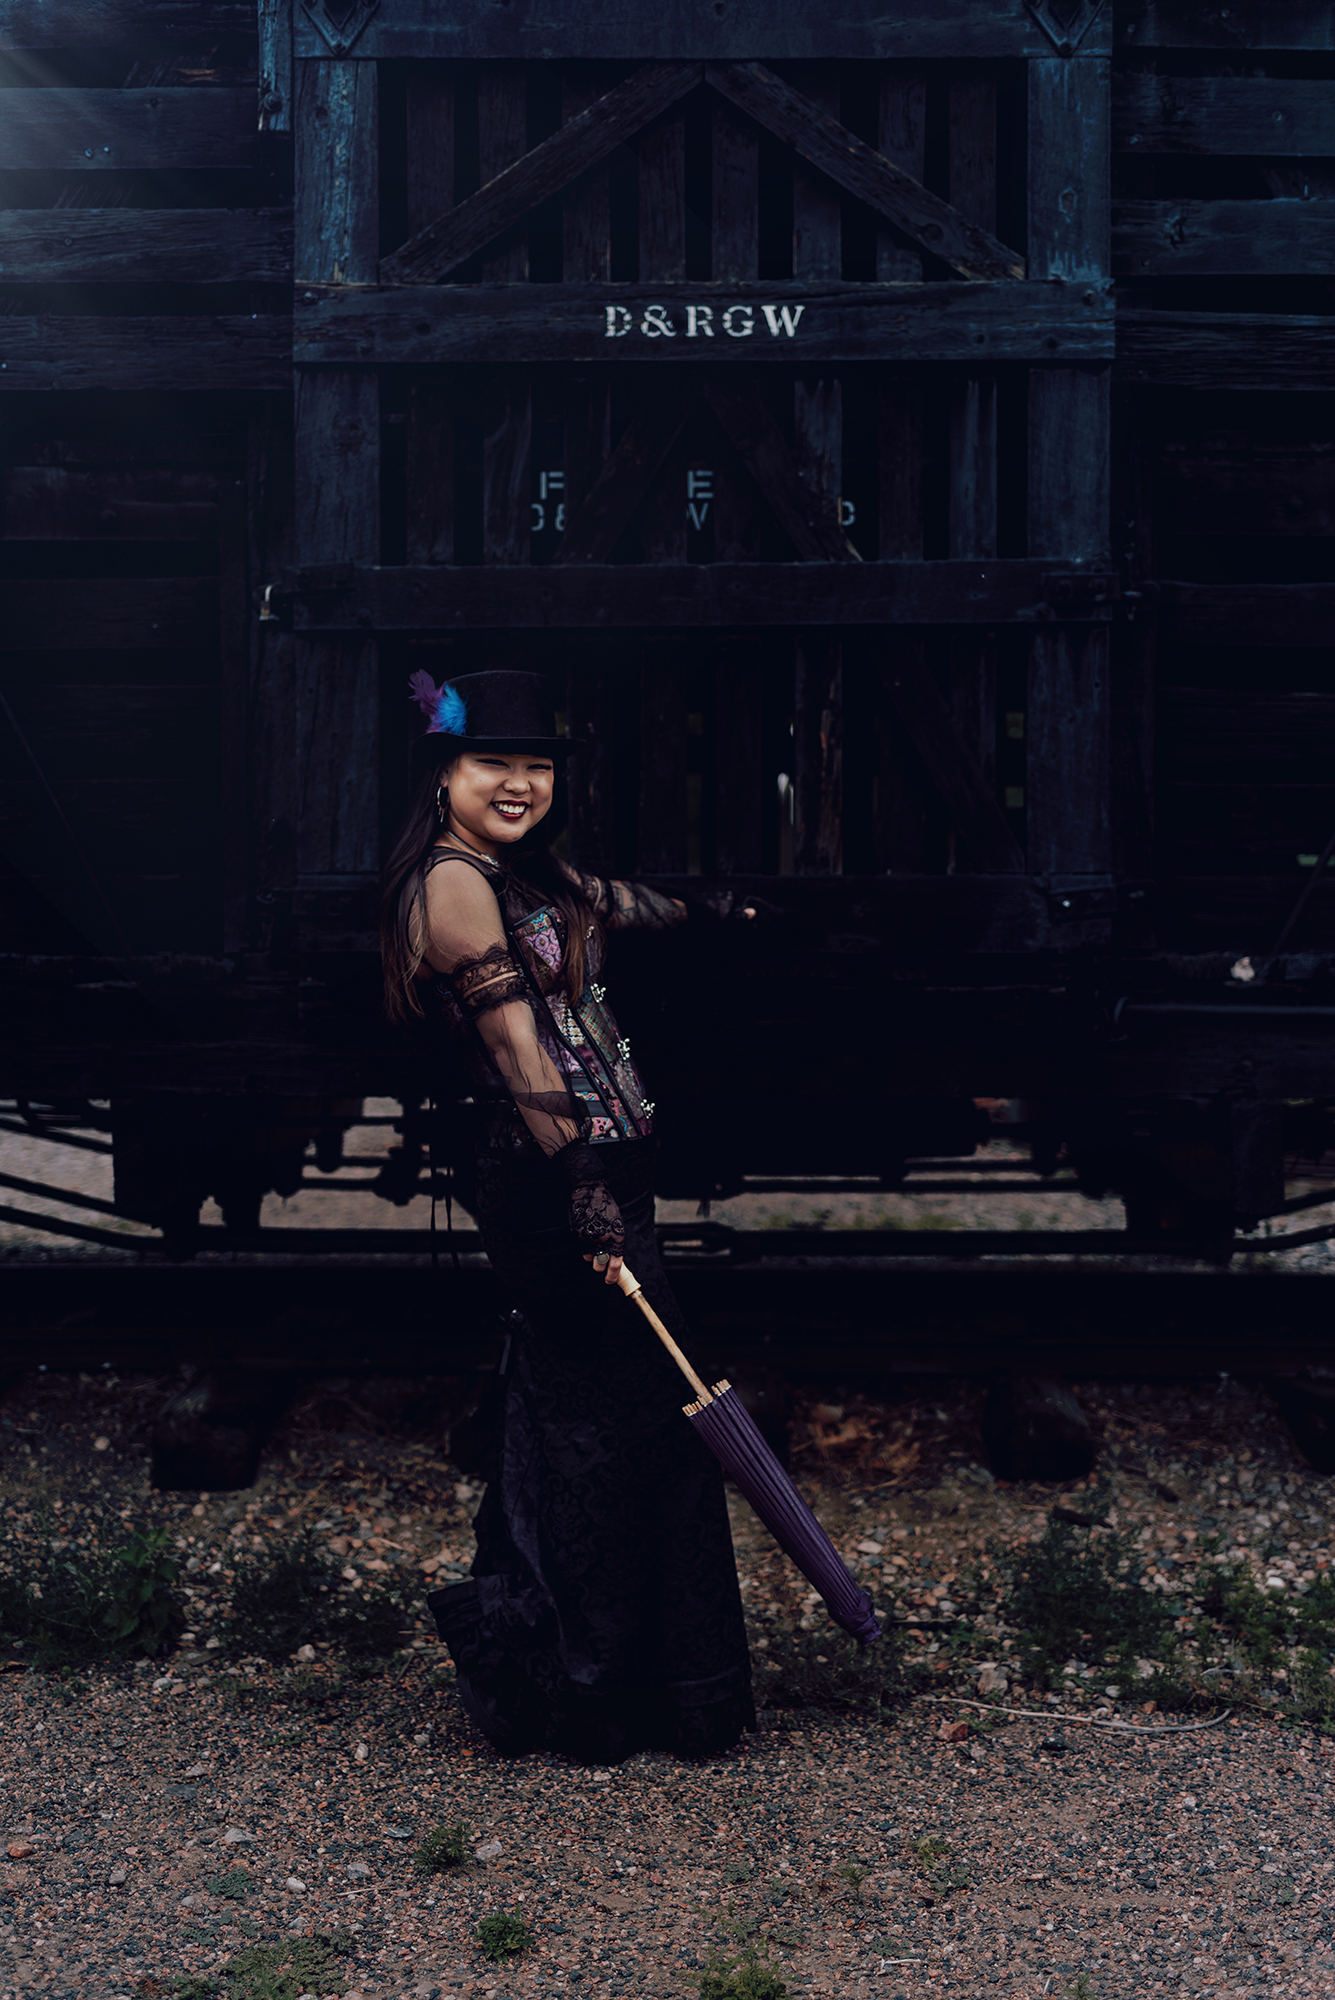 Kendra Colleen Photography takes a fantasy photo of a woman standing next to a wooden train car in a Victorian style steampunk outfit